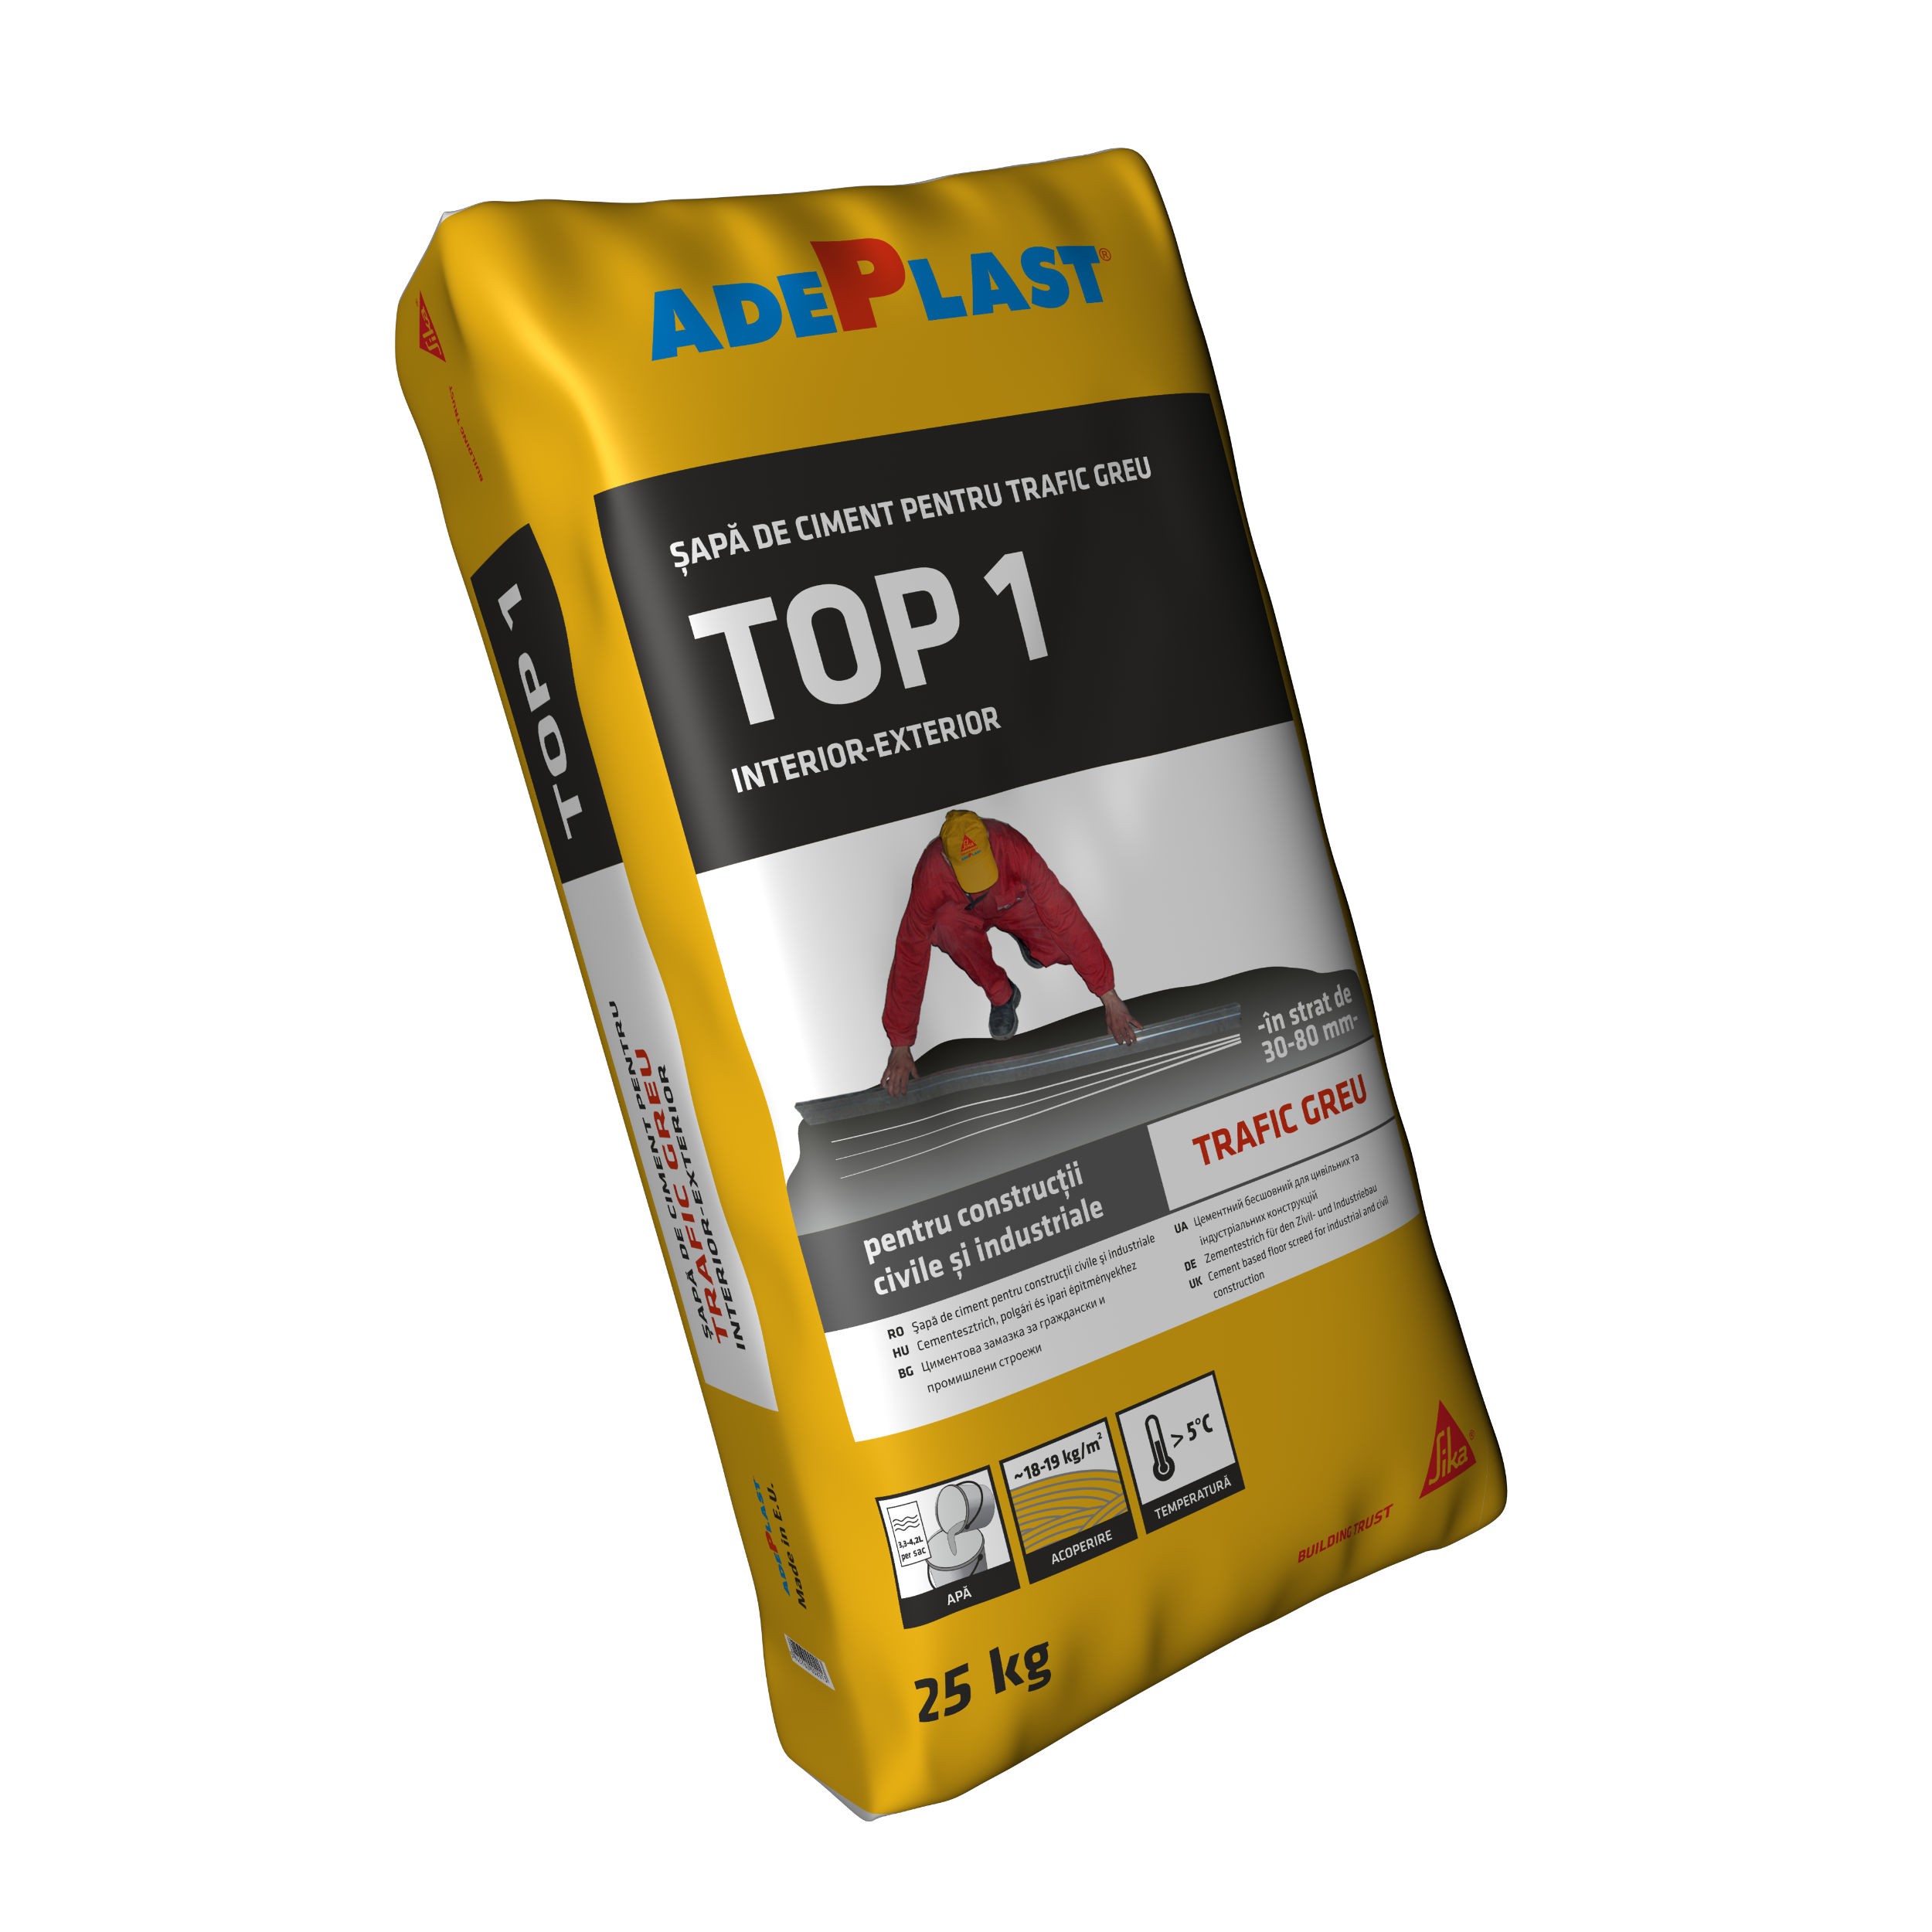 Equalization screed - Adeplast Top 1 Equalization Screed for Heavy Traffic 30 kg, https:maxbau.ro